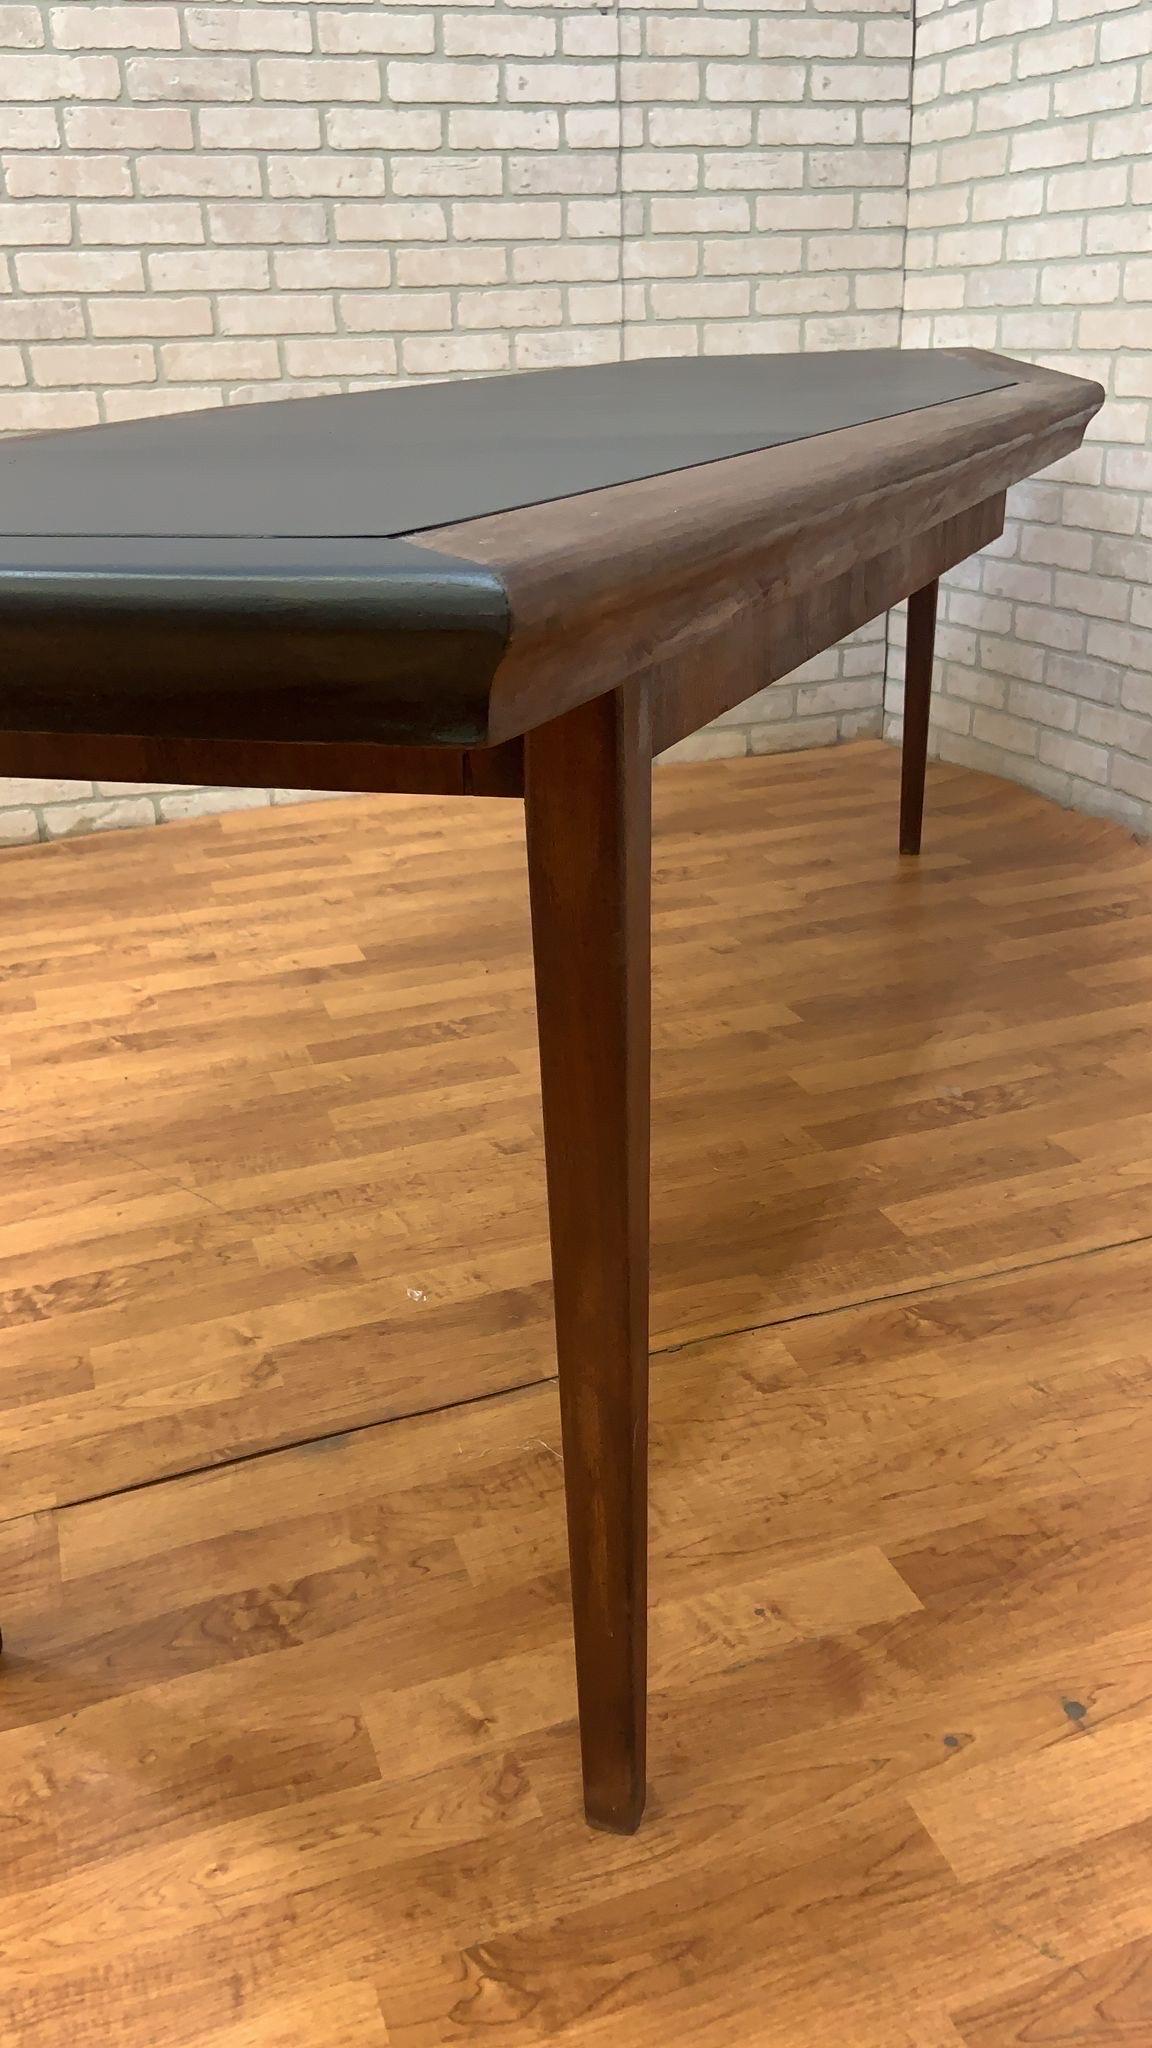 Midcentury Danish Walnut Narrow Boat Shaped Table with Black Laminate Inlay In Good Condition For Sale In Chicago, IL